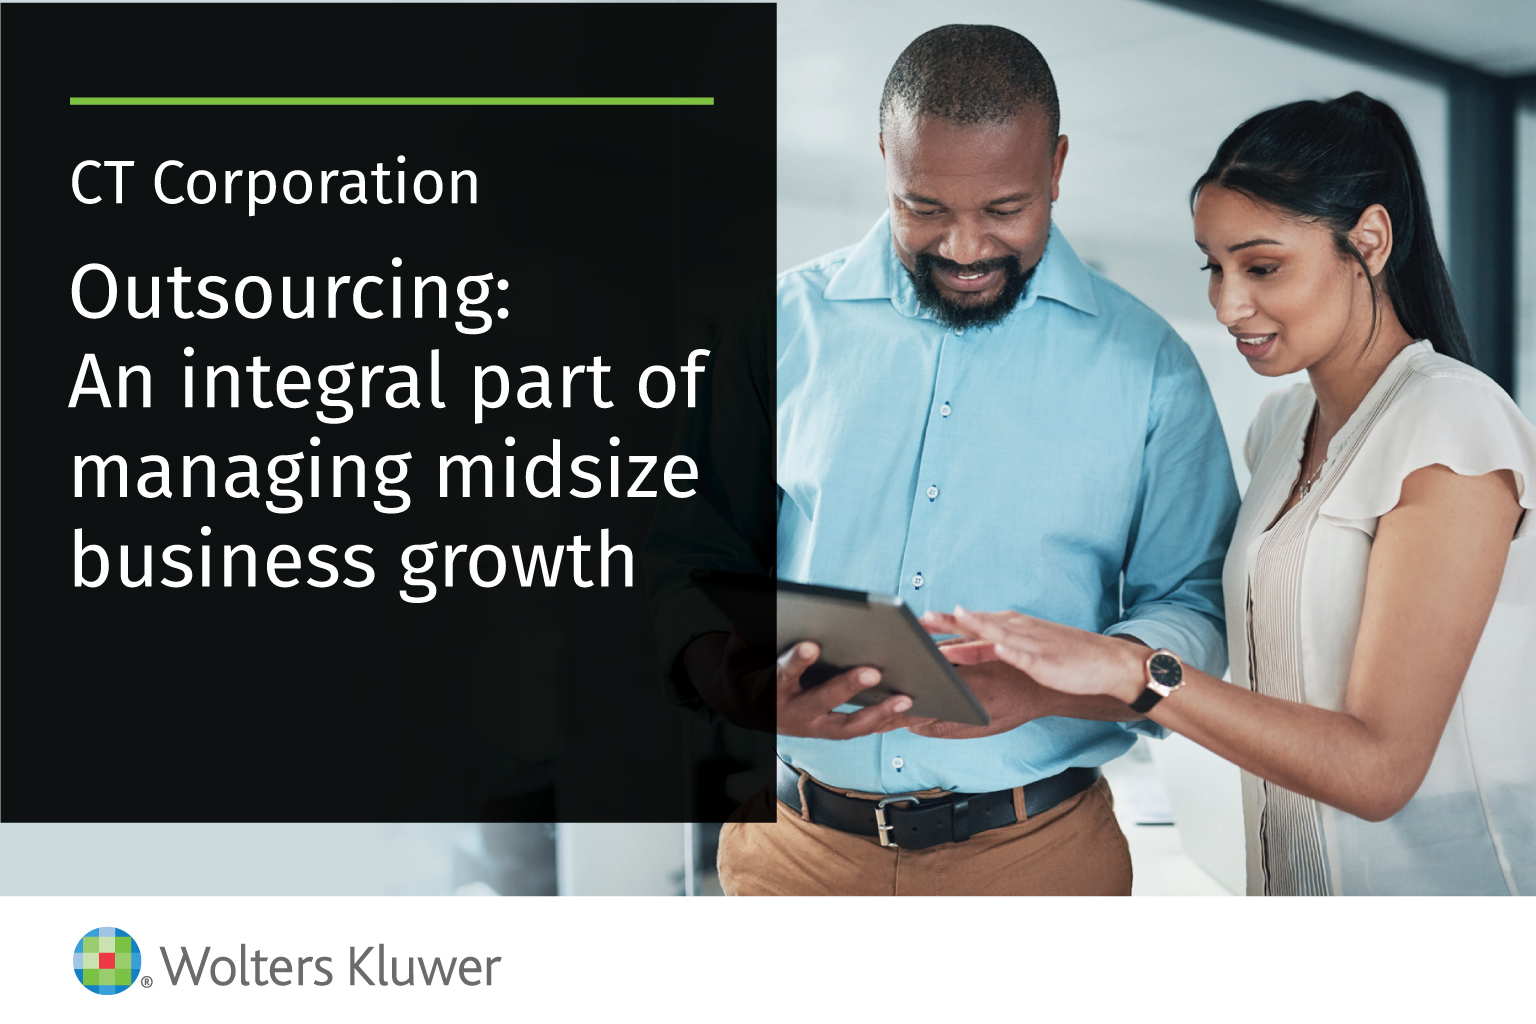 Outsourcing: An integral part of managing midsize business growth